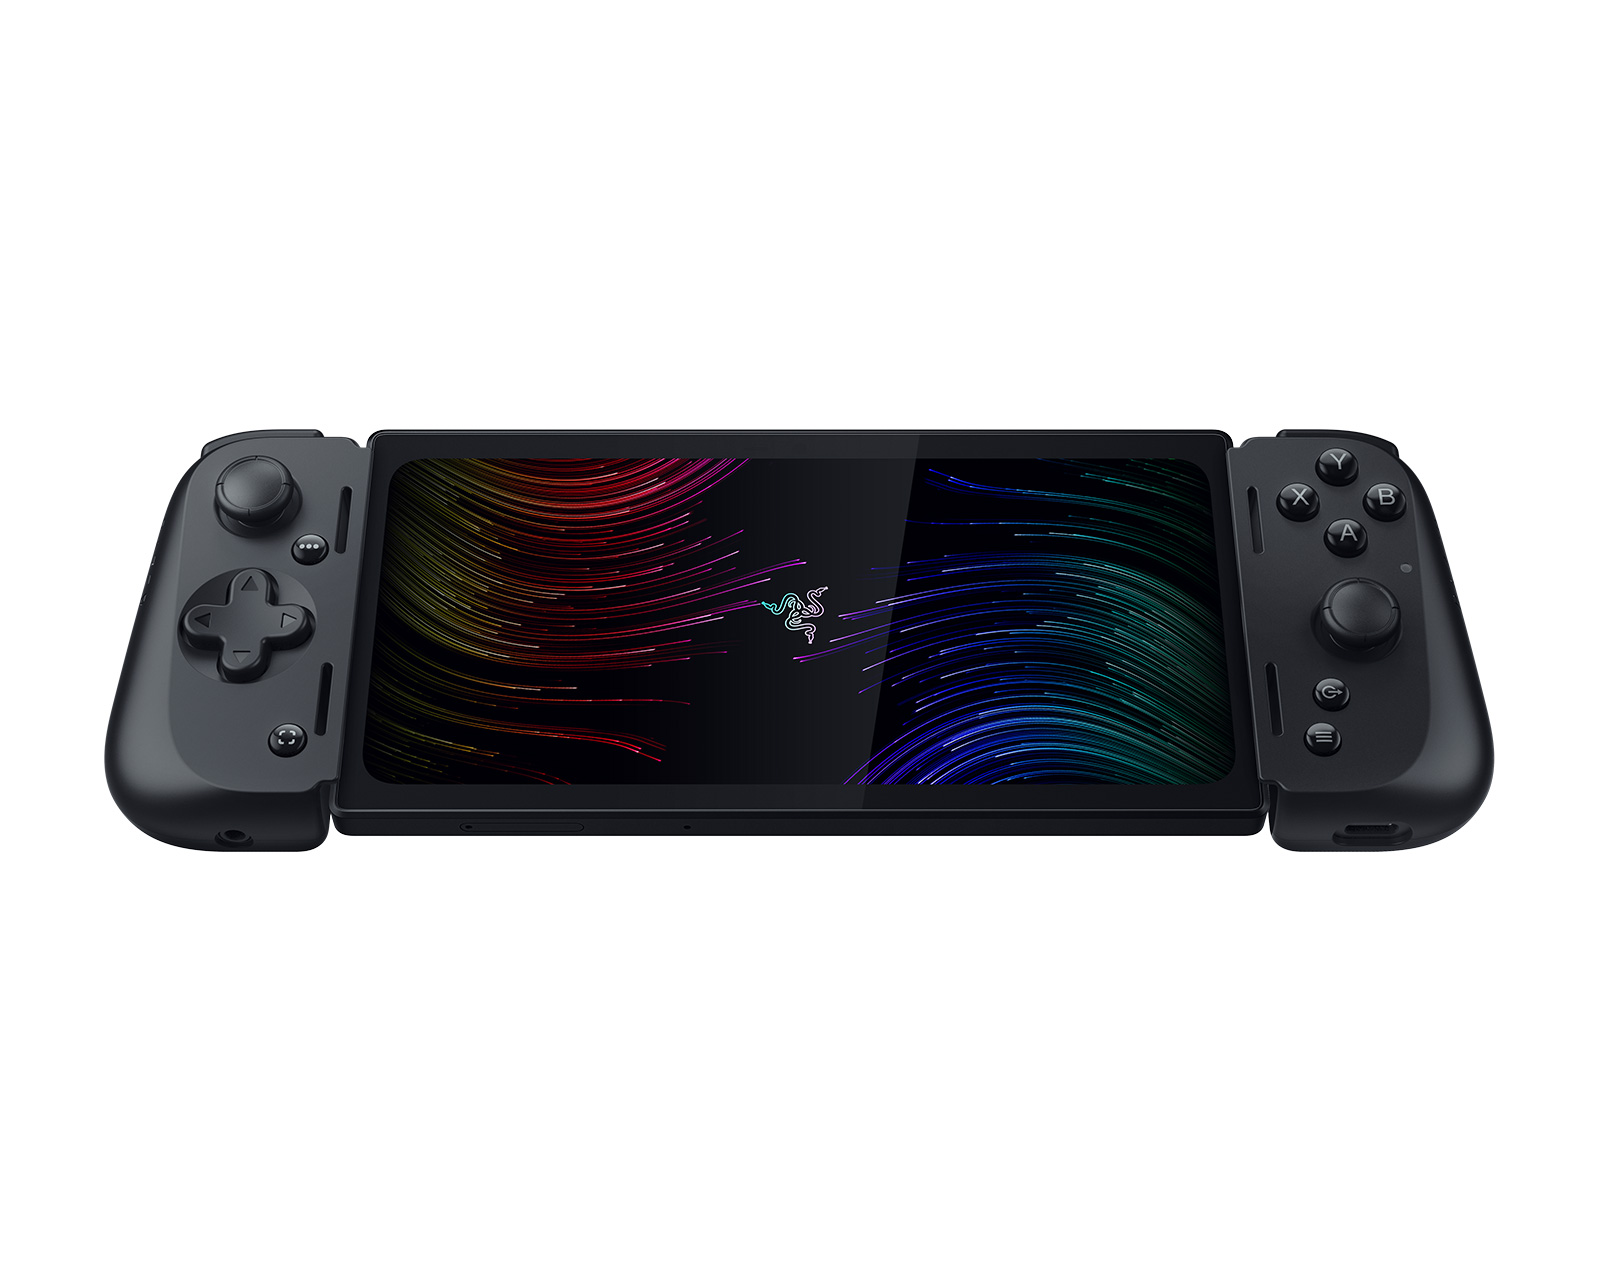 The Razer Kishi V2 is a switched-on smartphone controller